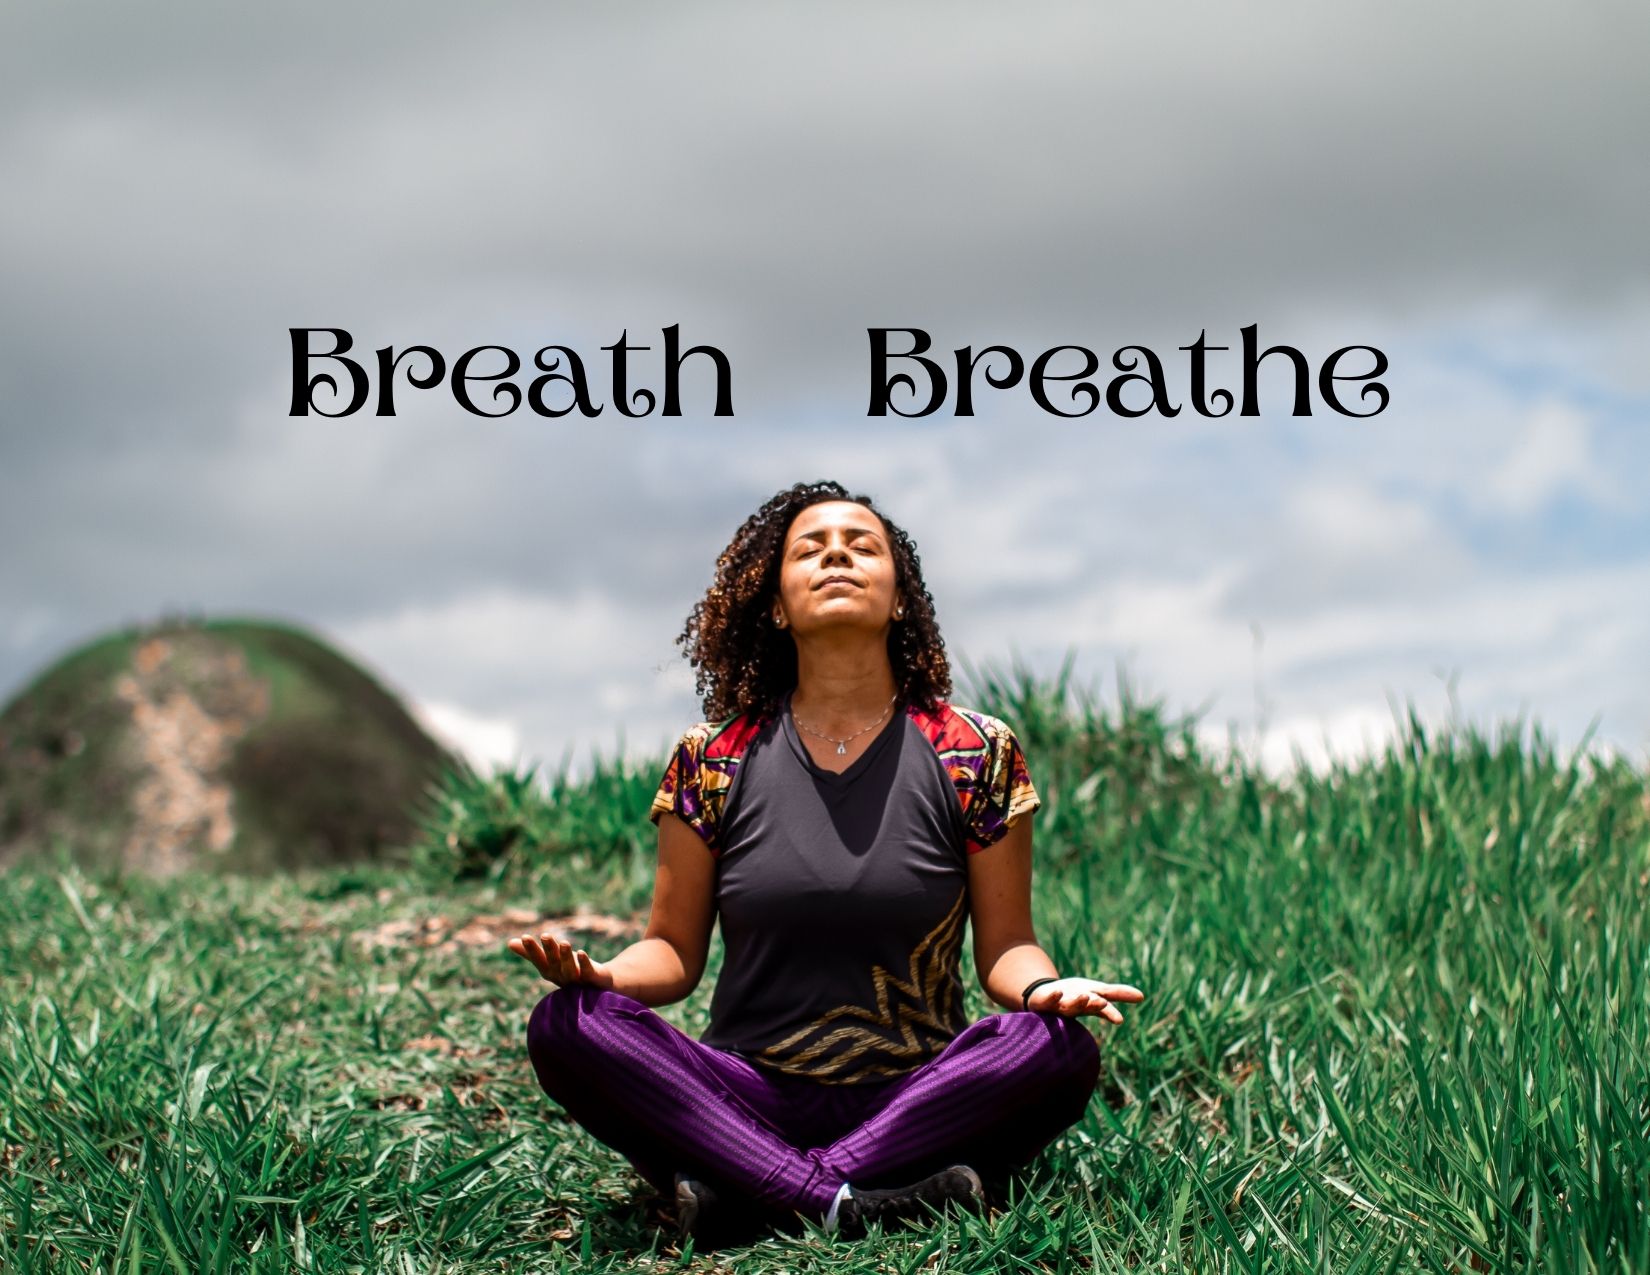 A graphic showing a woman in a meditation position breathing, with the words breath vs. breathe